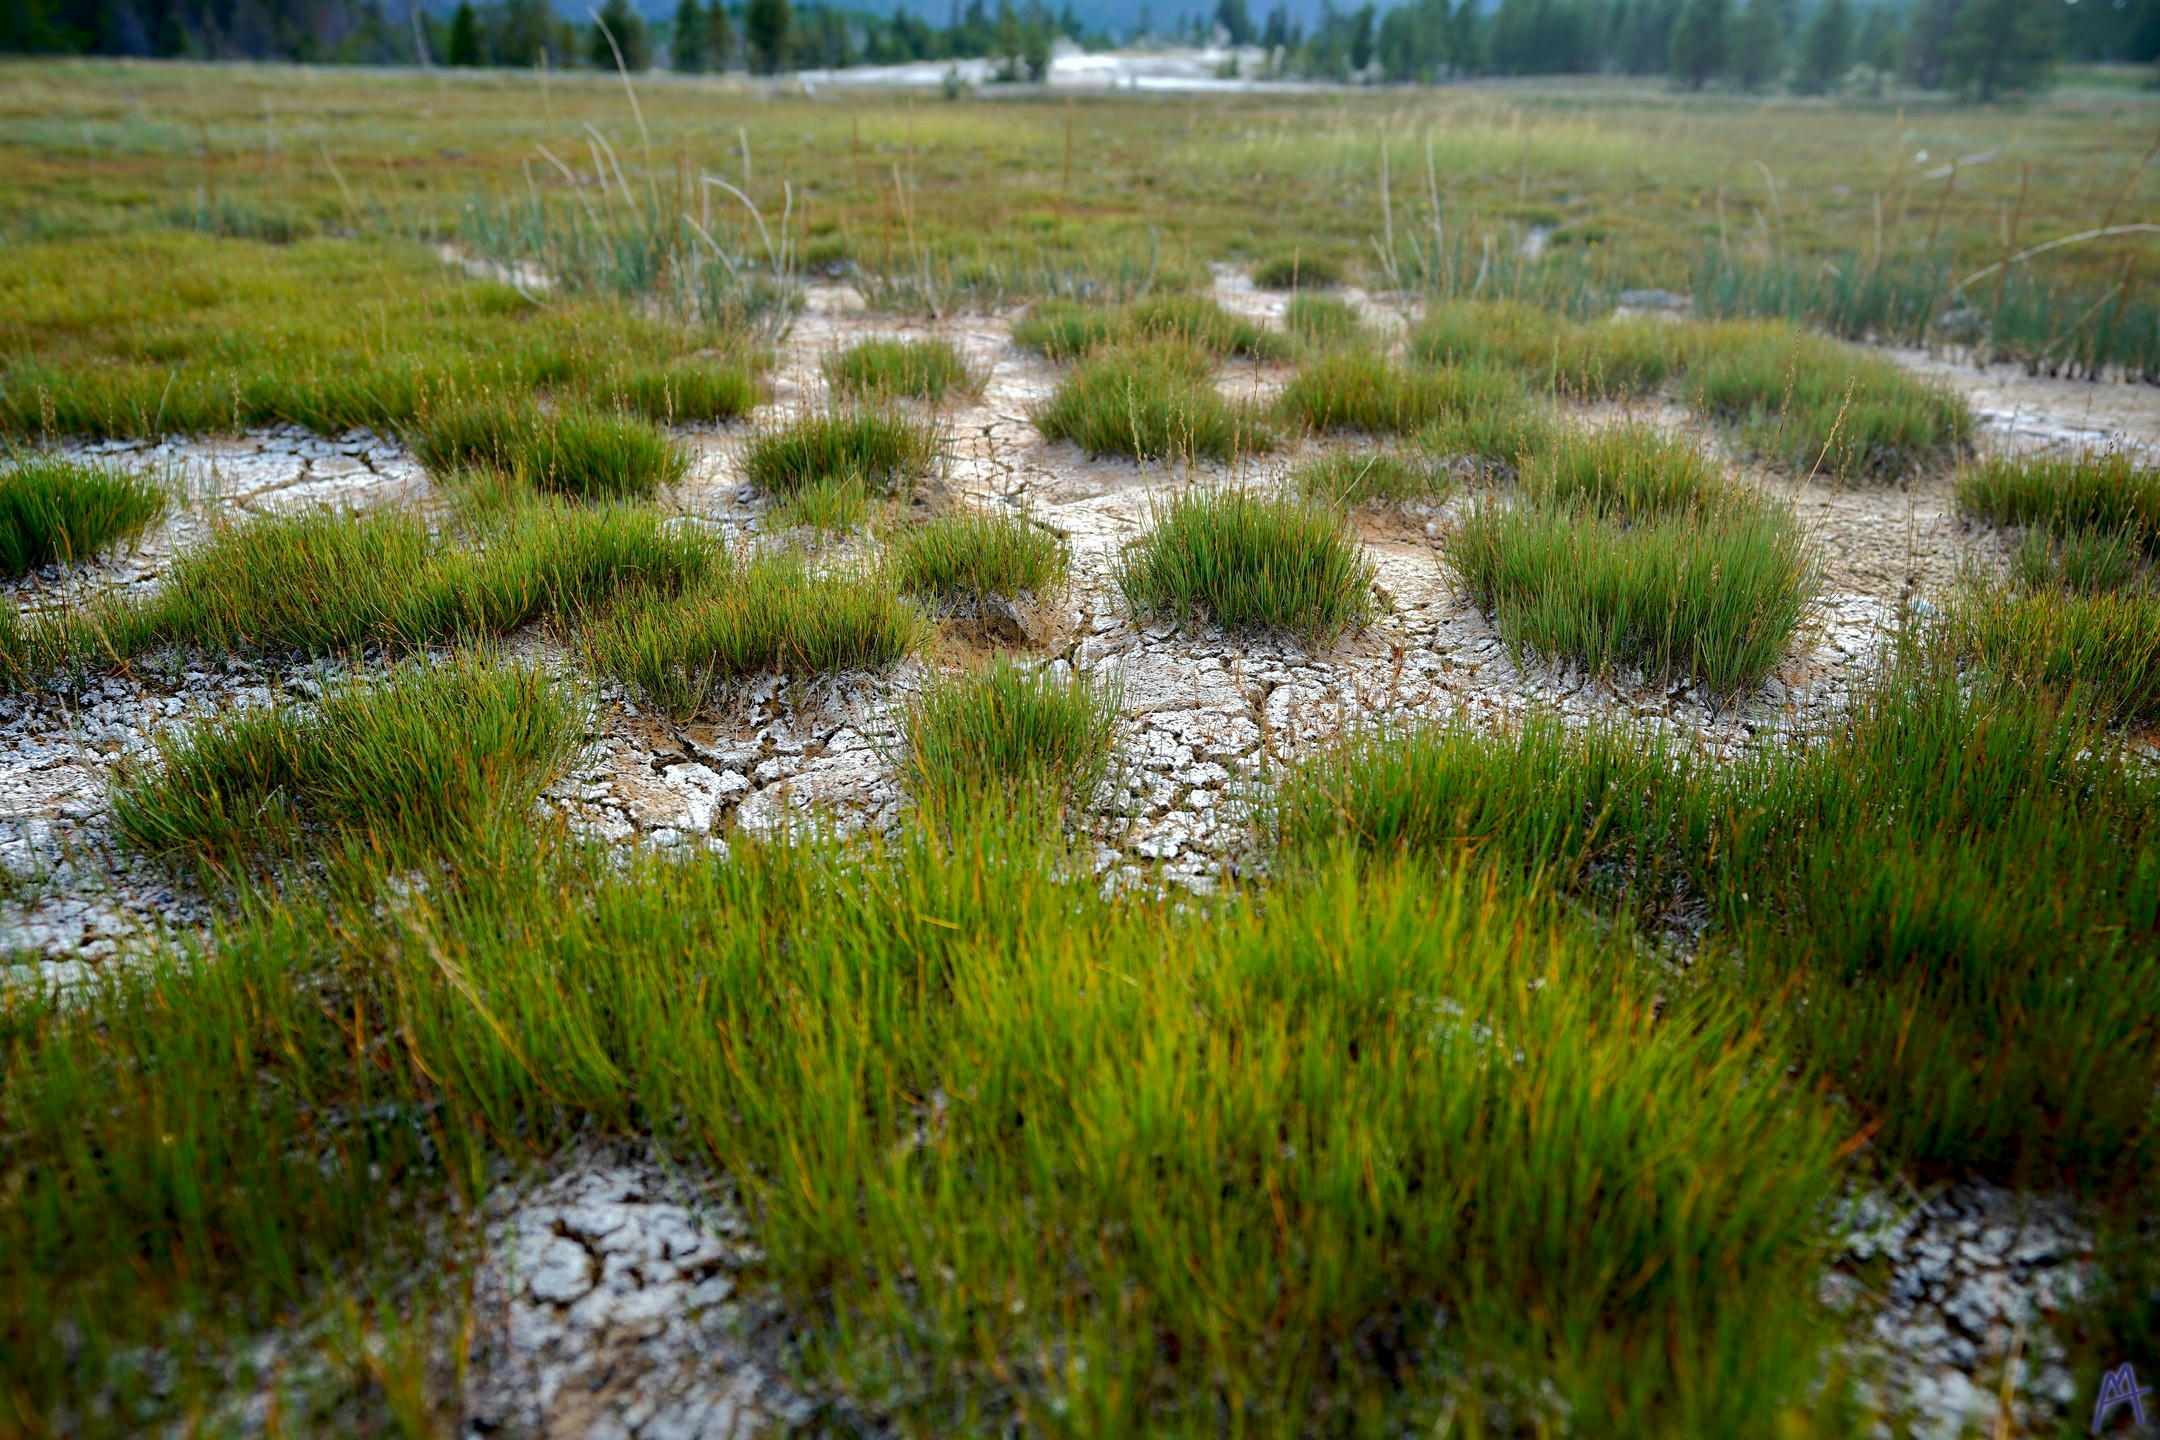 Tuffs of grass on cracked ground at Yellowstone